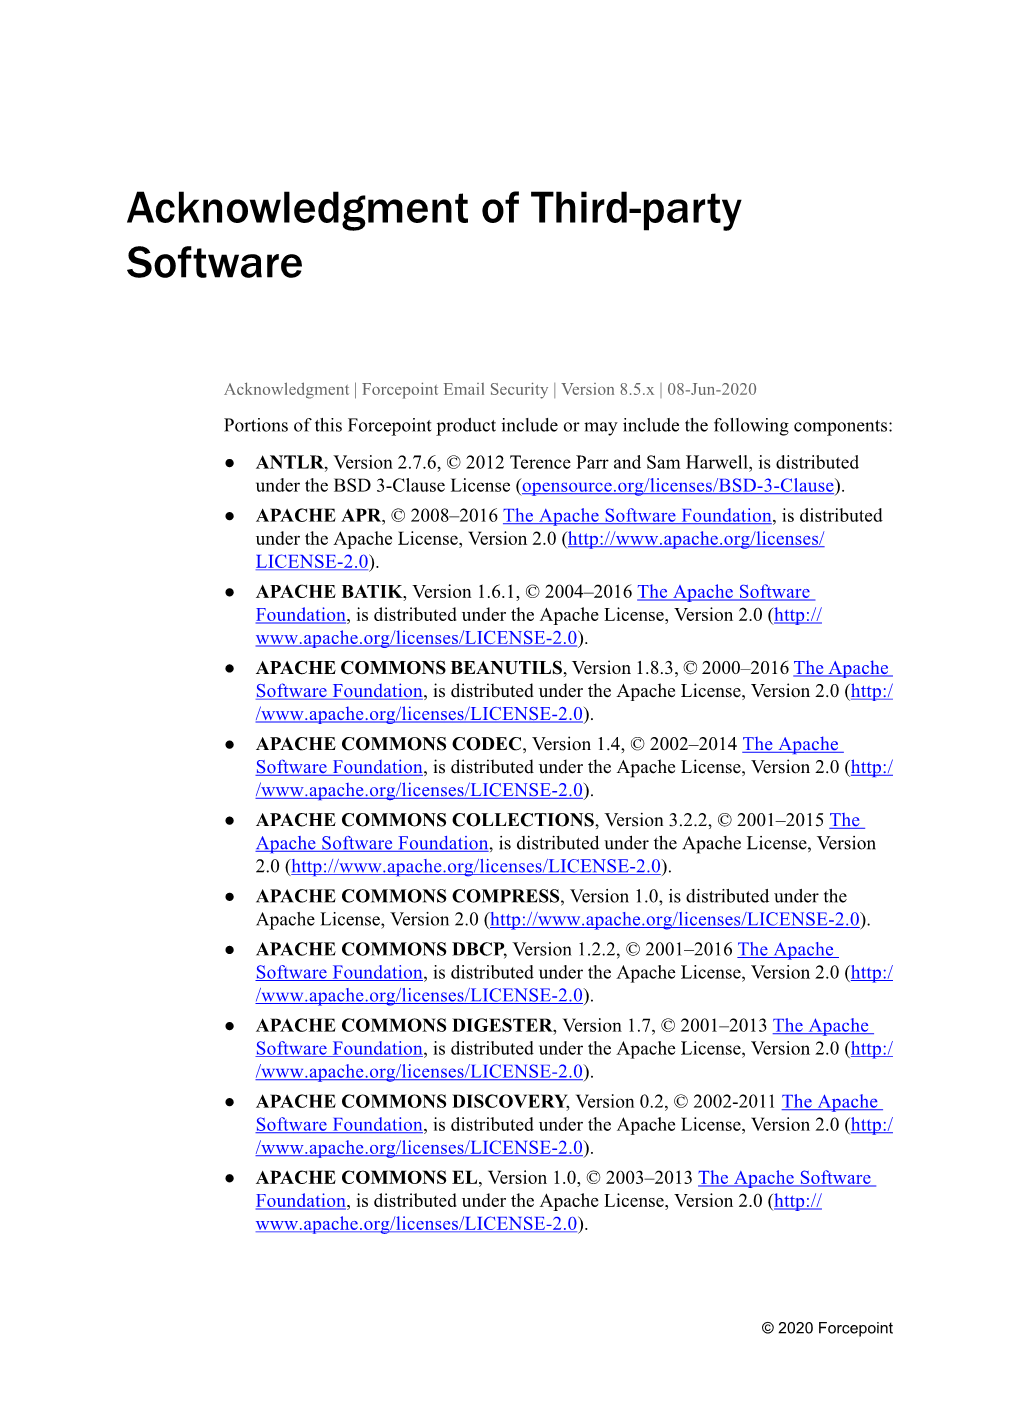 Acknowledgment of Third-Party Software